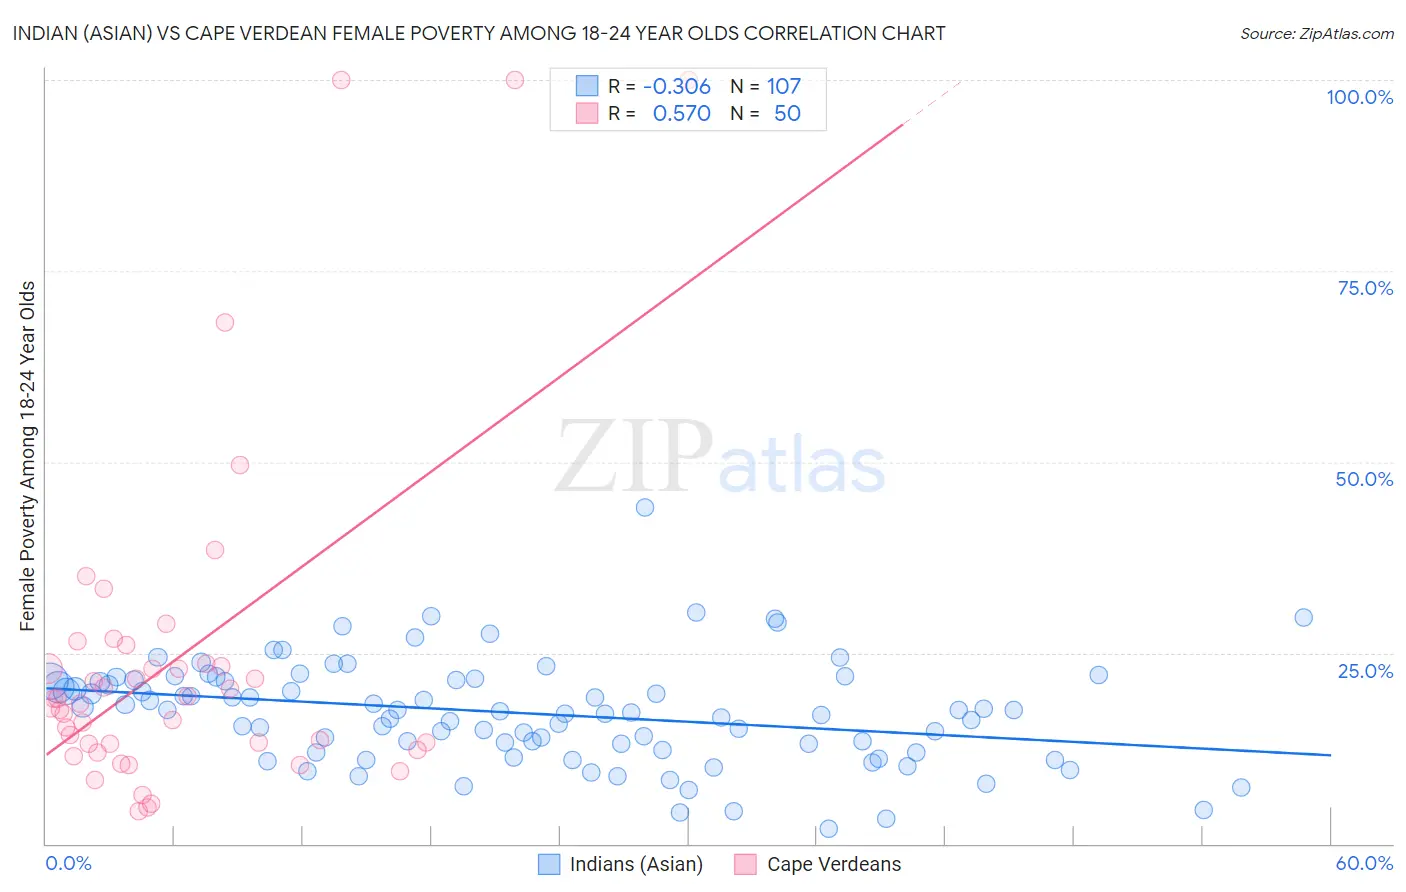 Indian (Asian) vs Cape Verdean Female Poverty Among 18-24 Year Olds